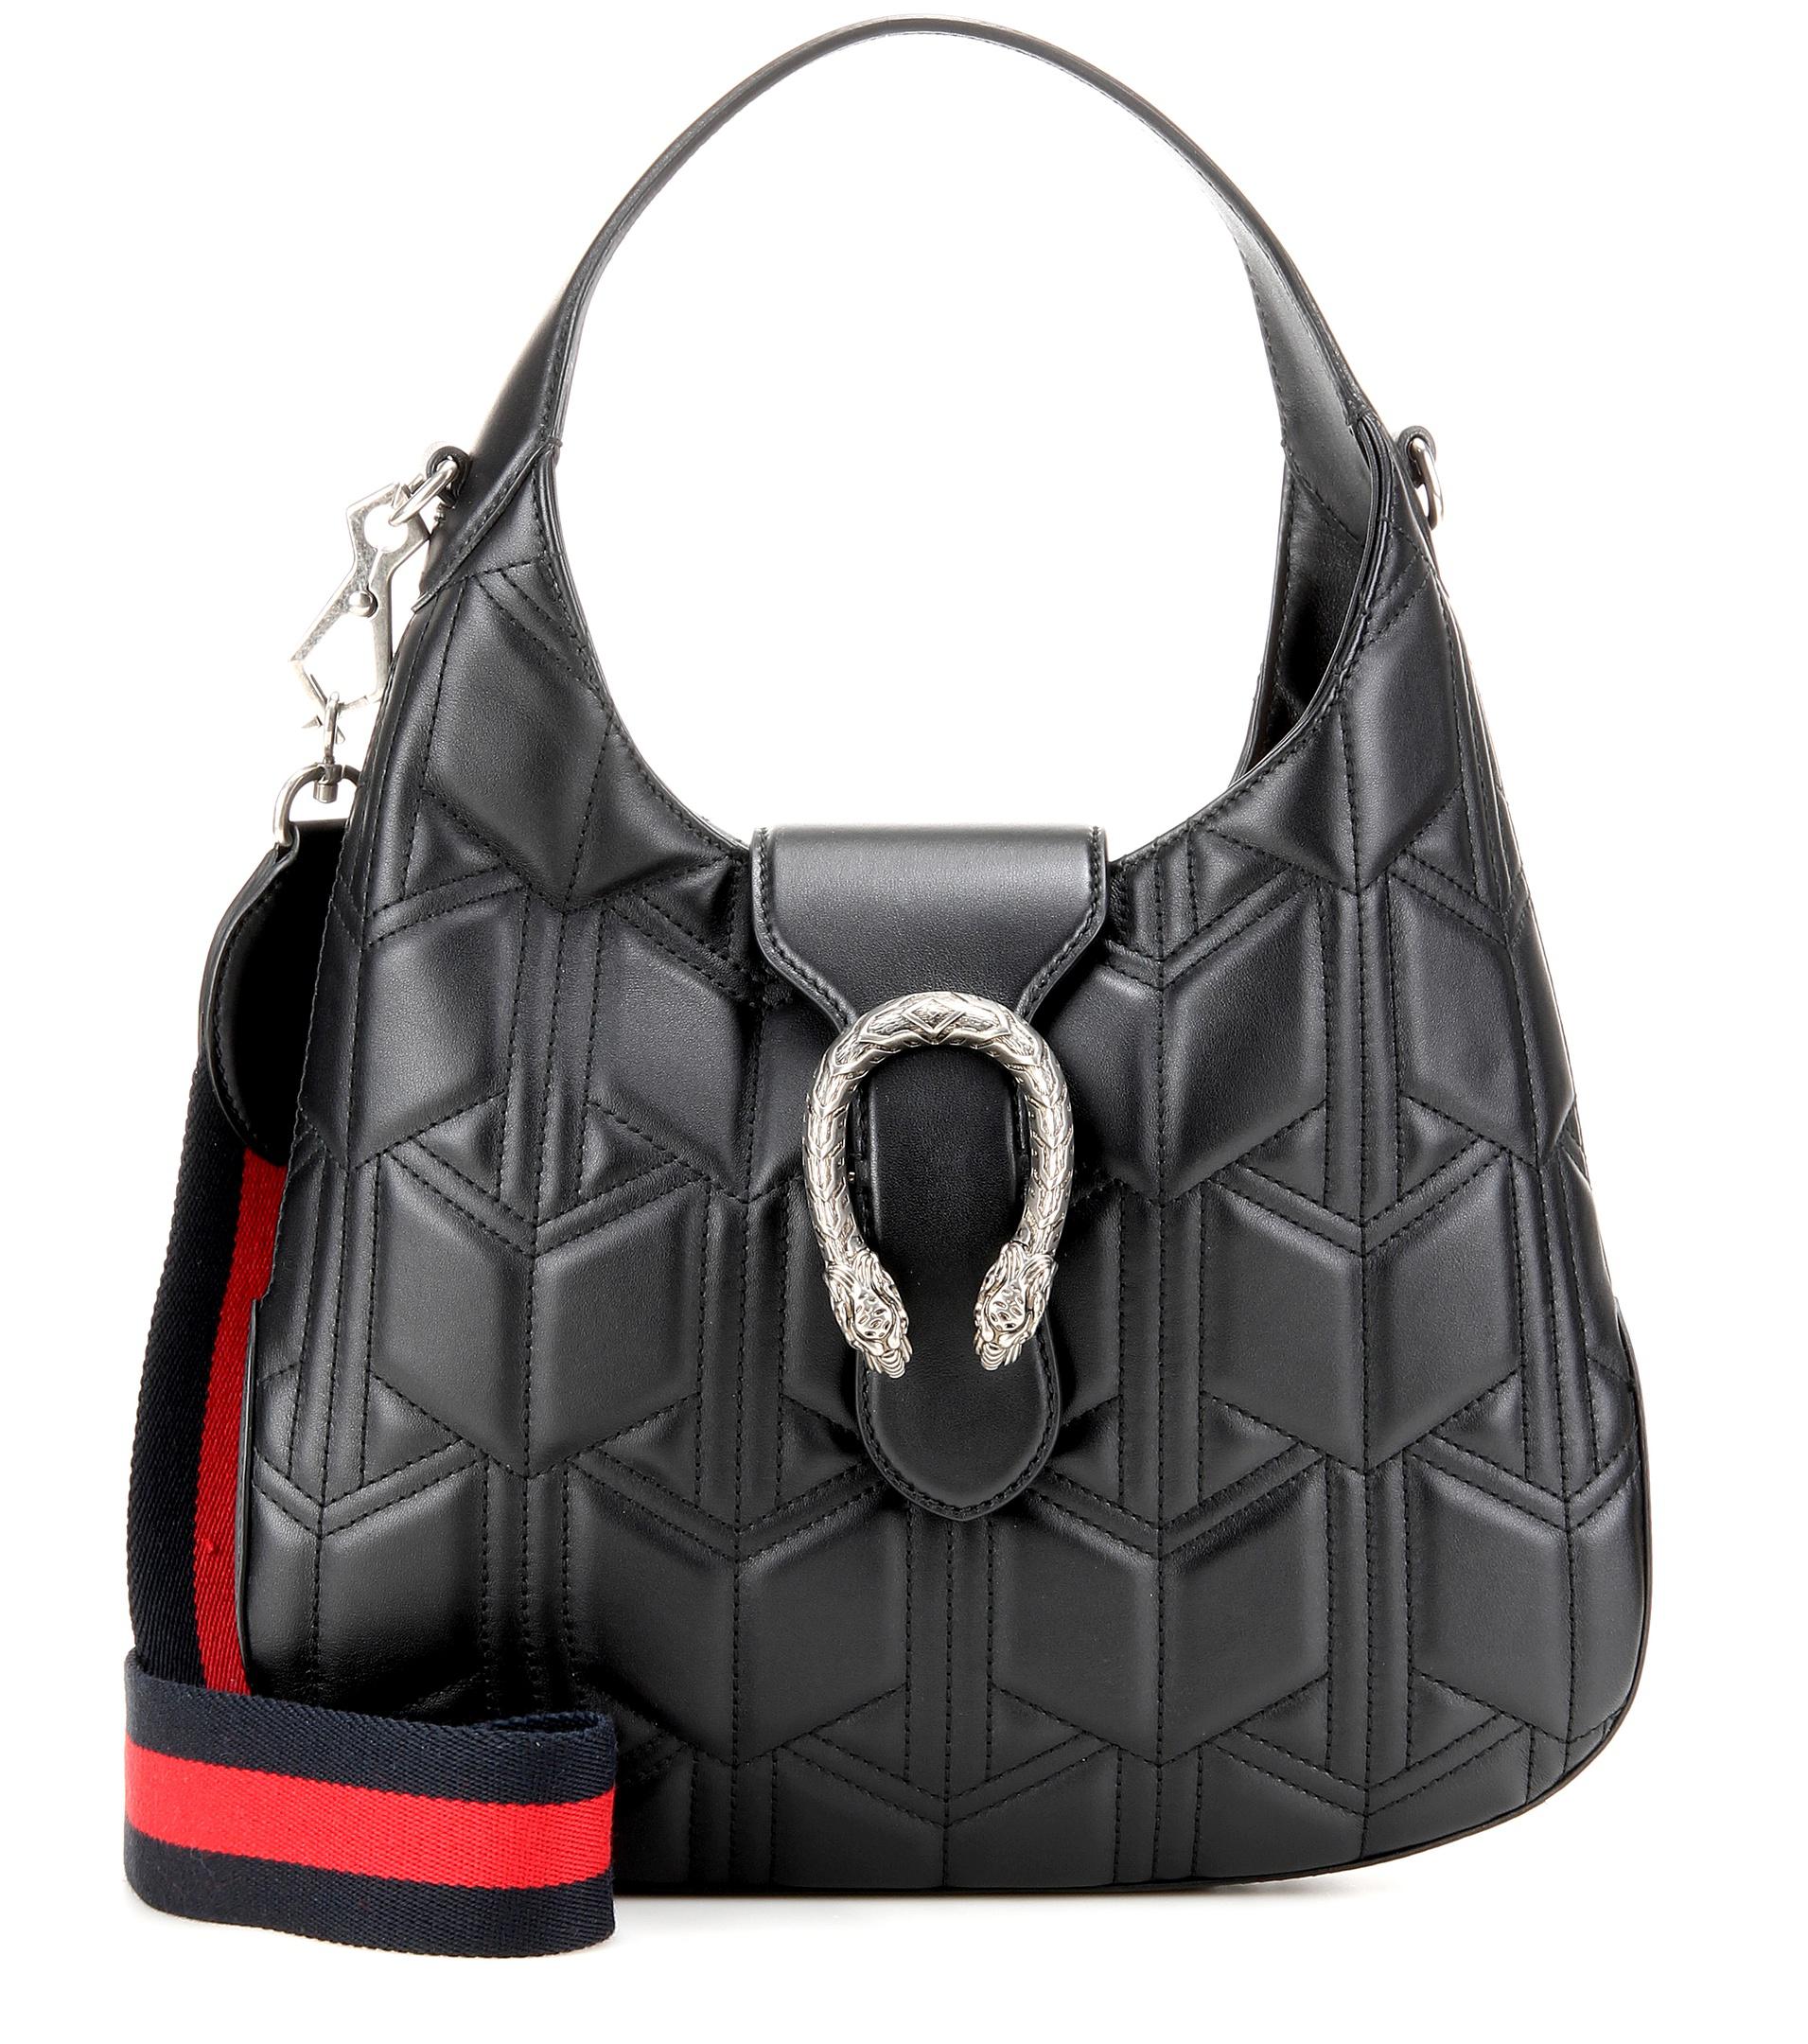 compass Stop The actual Gucci Dionysus Matelassé Leather Hobo Shoulder Bag in Black | Lyst